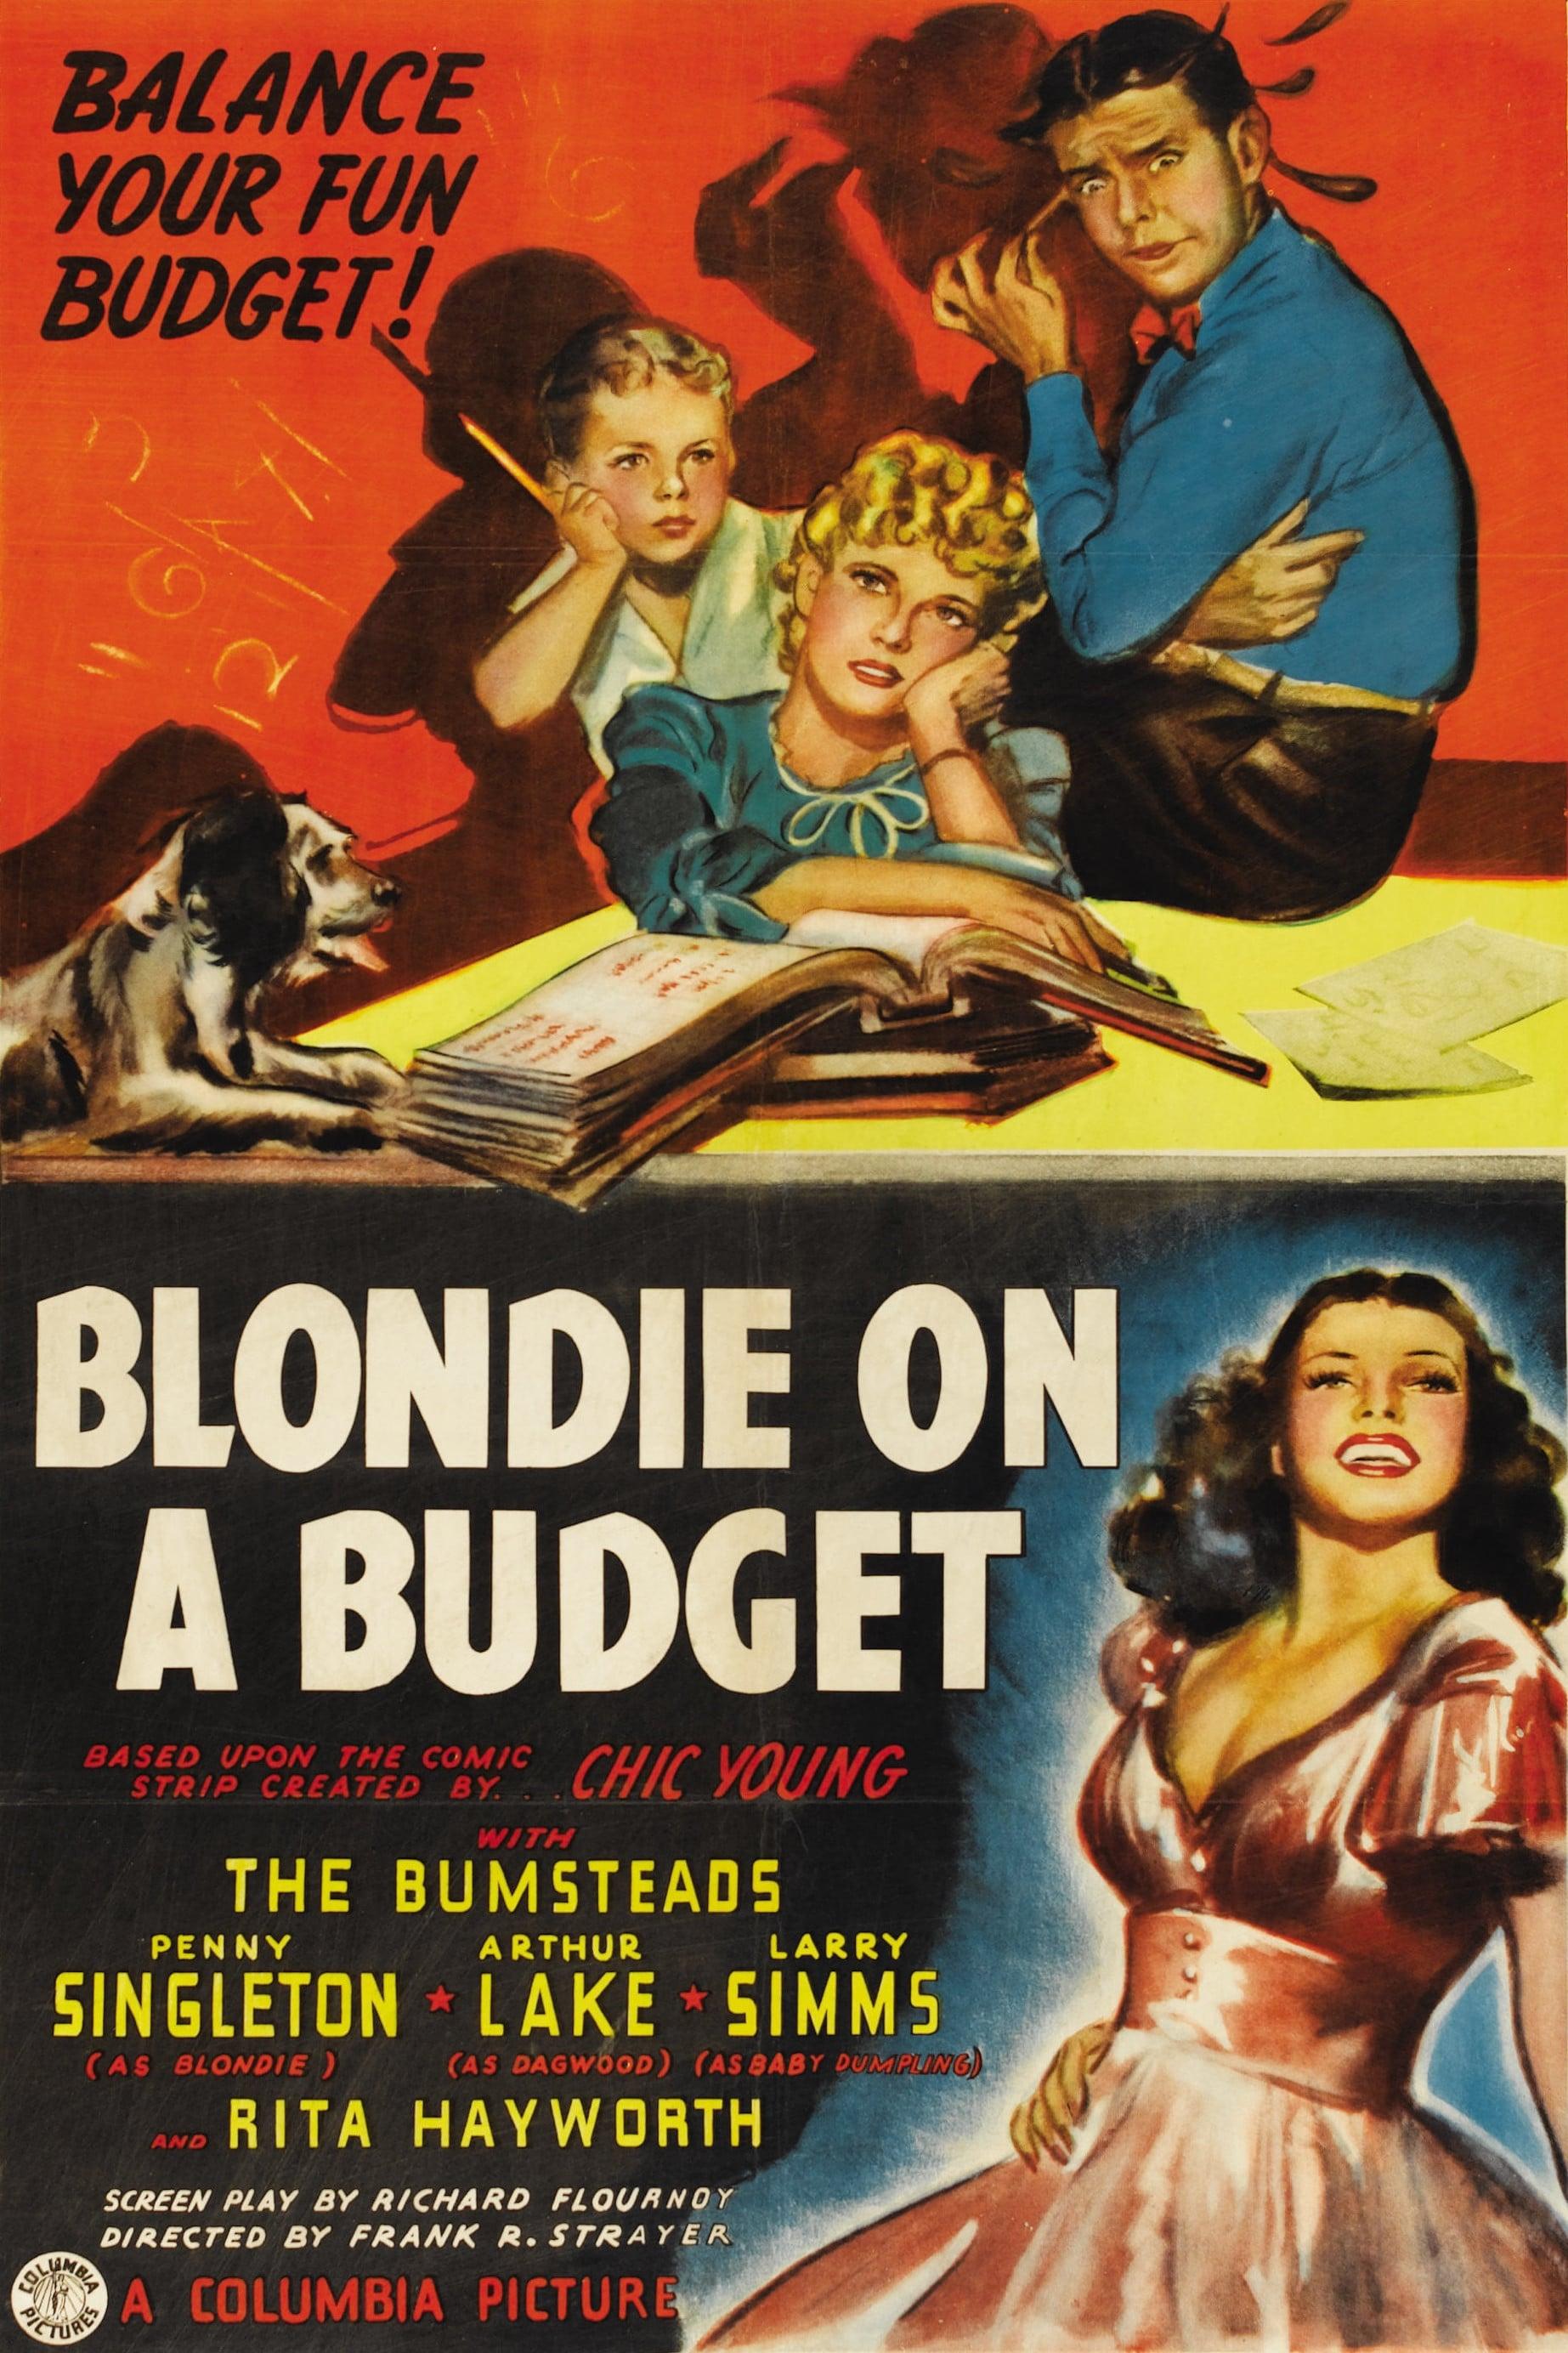 Blondie on a Budget poster